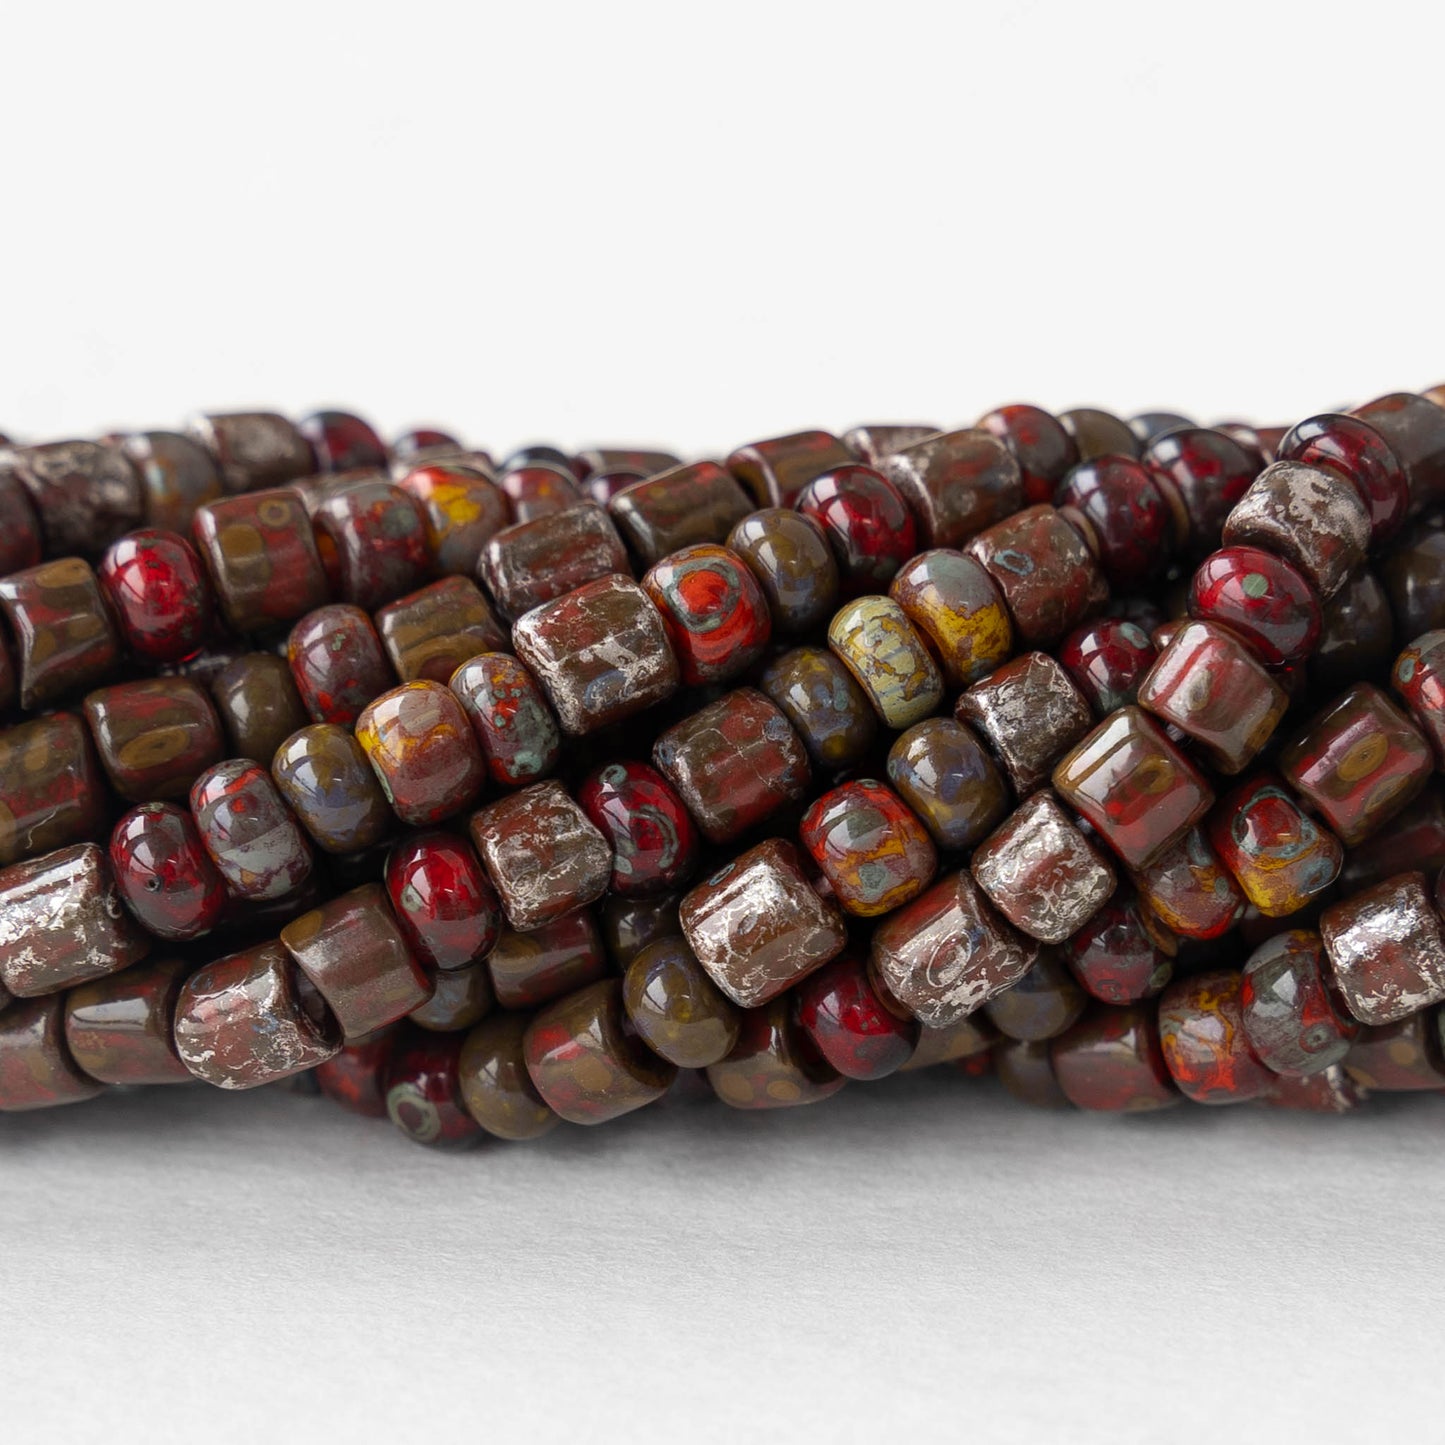 6/0 Seed Beads and Tubes - Aged Red Metallic Mix - 20 inches